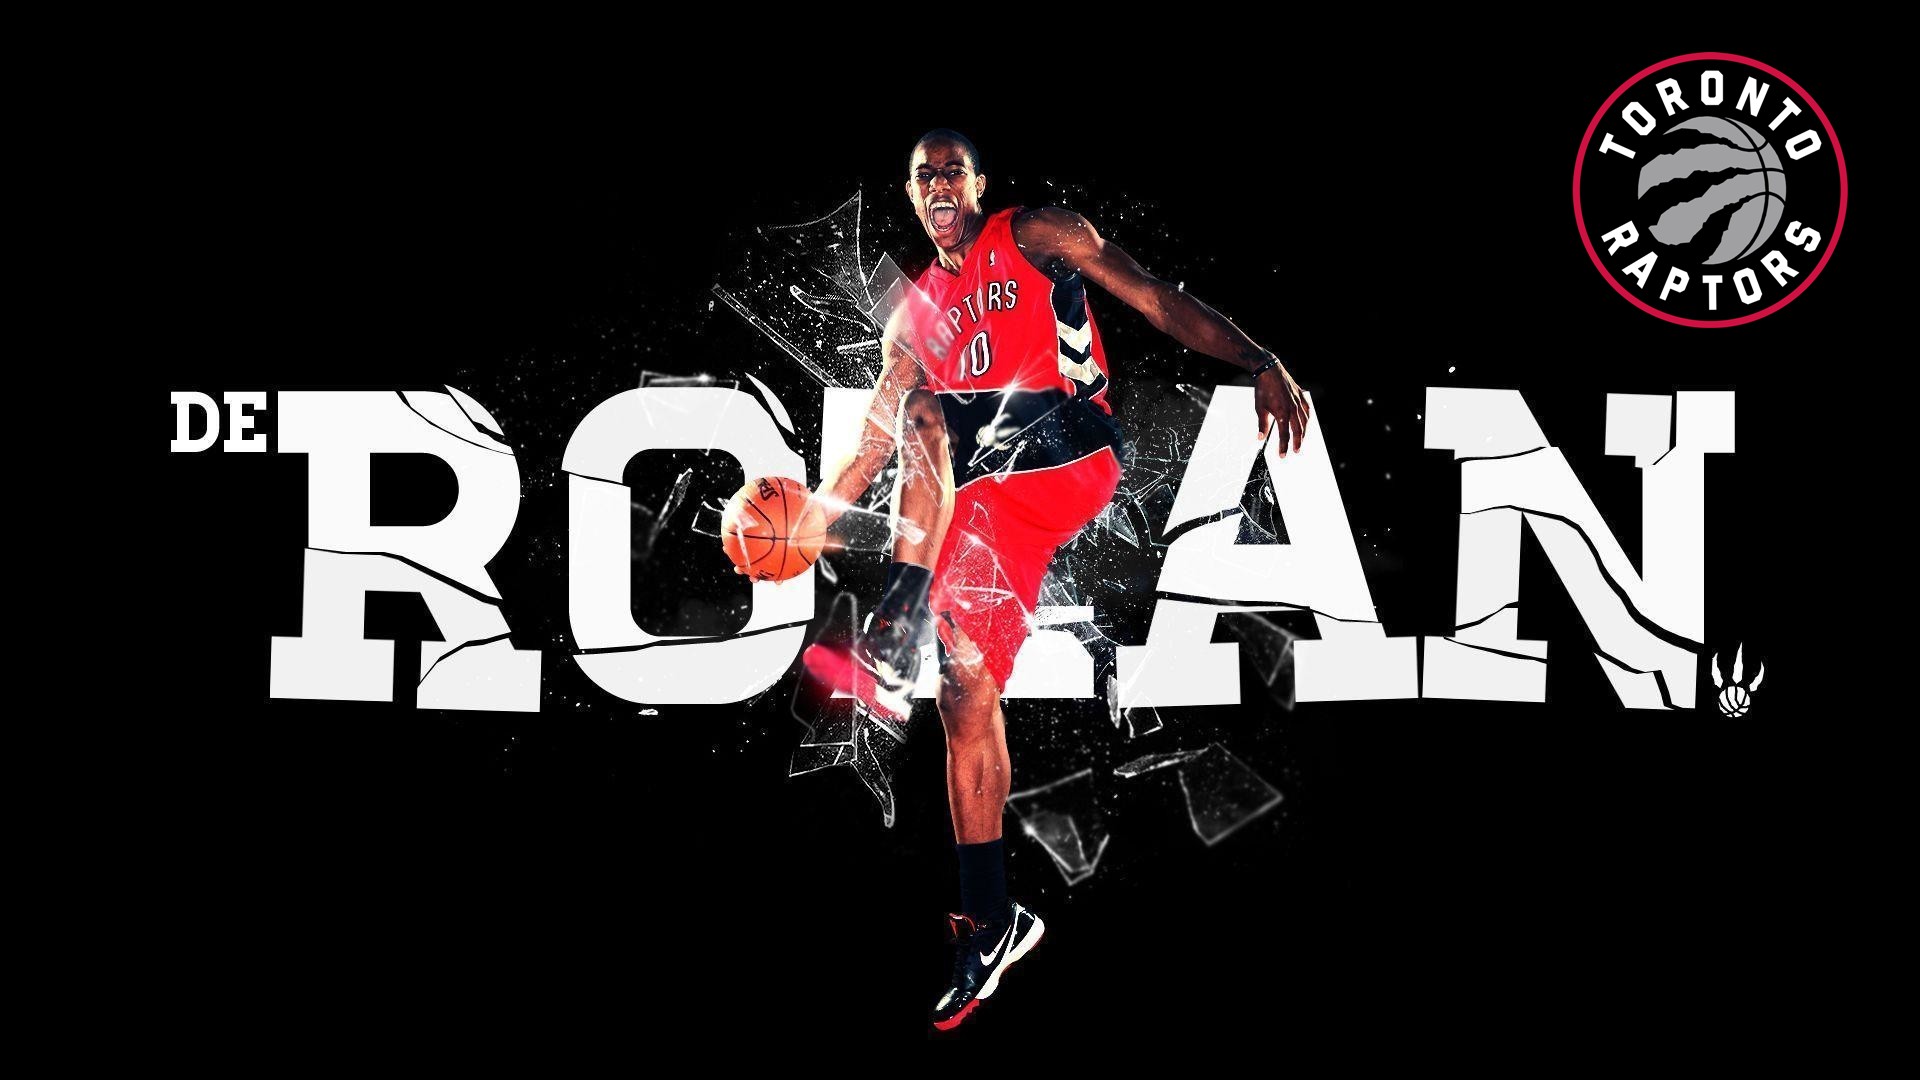 Wallpapers HD DeMar DeRozan with image dimensions 1920x1080 pixel. You can make this wallpaper for your Desktop Computer Backgrounds, Windows or Mac Screensavers, iPhone Lock screen, Tablet or Android and another Mobile Phone device